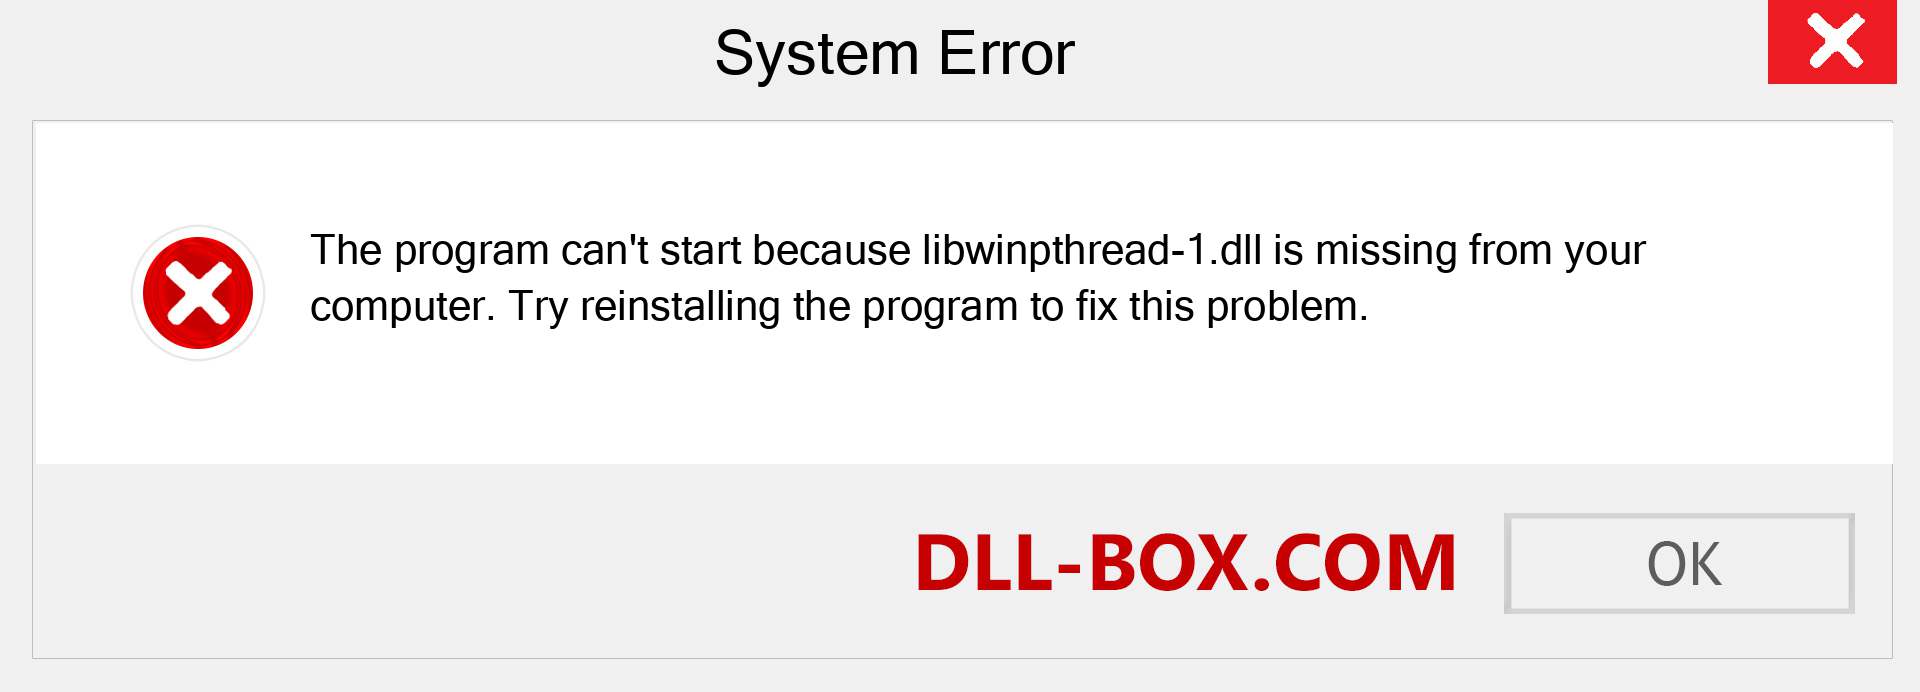  libwinpthread-1.dll file is missing?. Download for Windows 7, 8, 10 - Fix  libwinpthread-1 dll Missing Error on Windows, photos, images